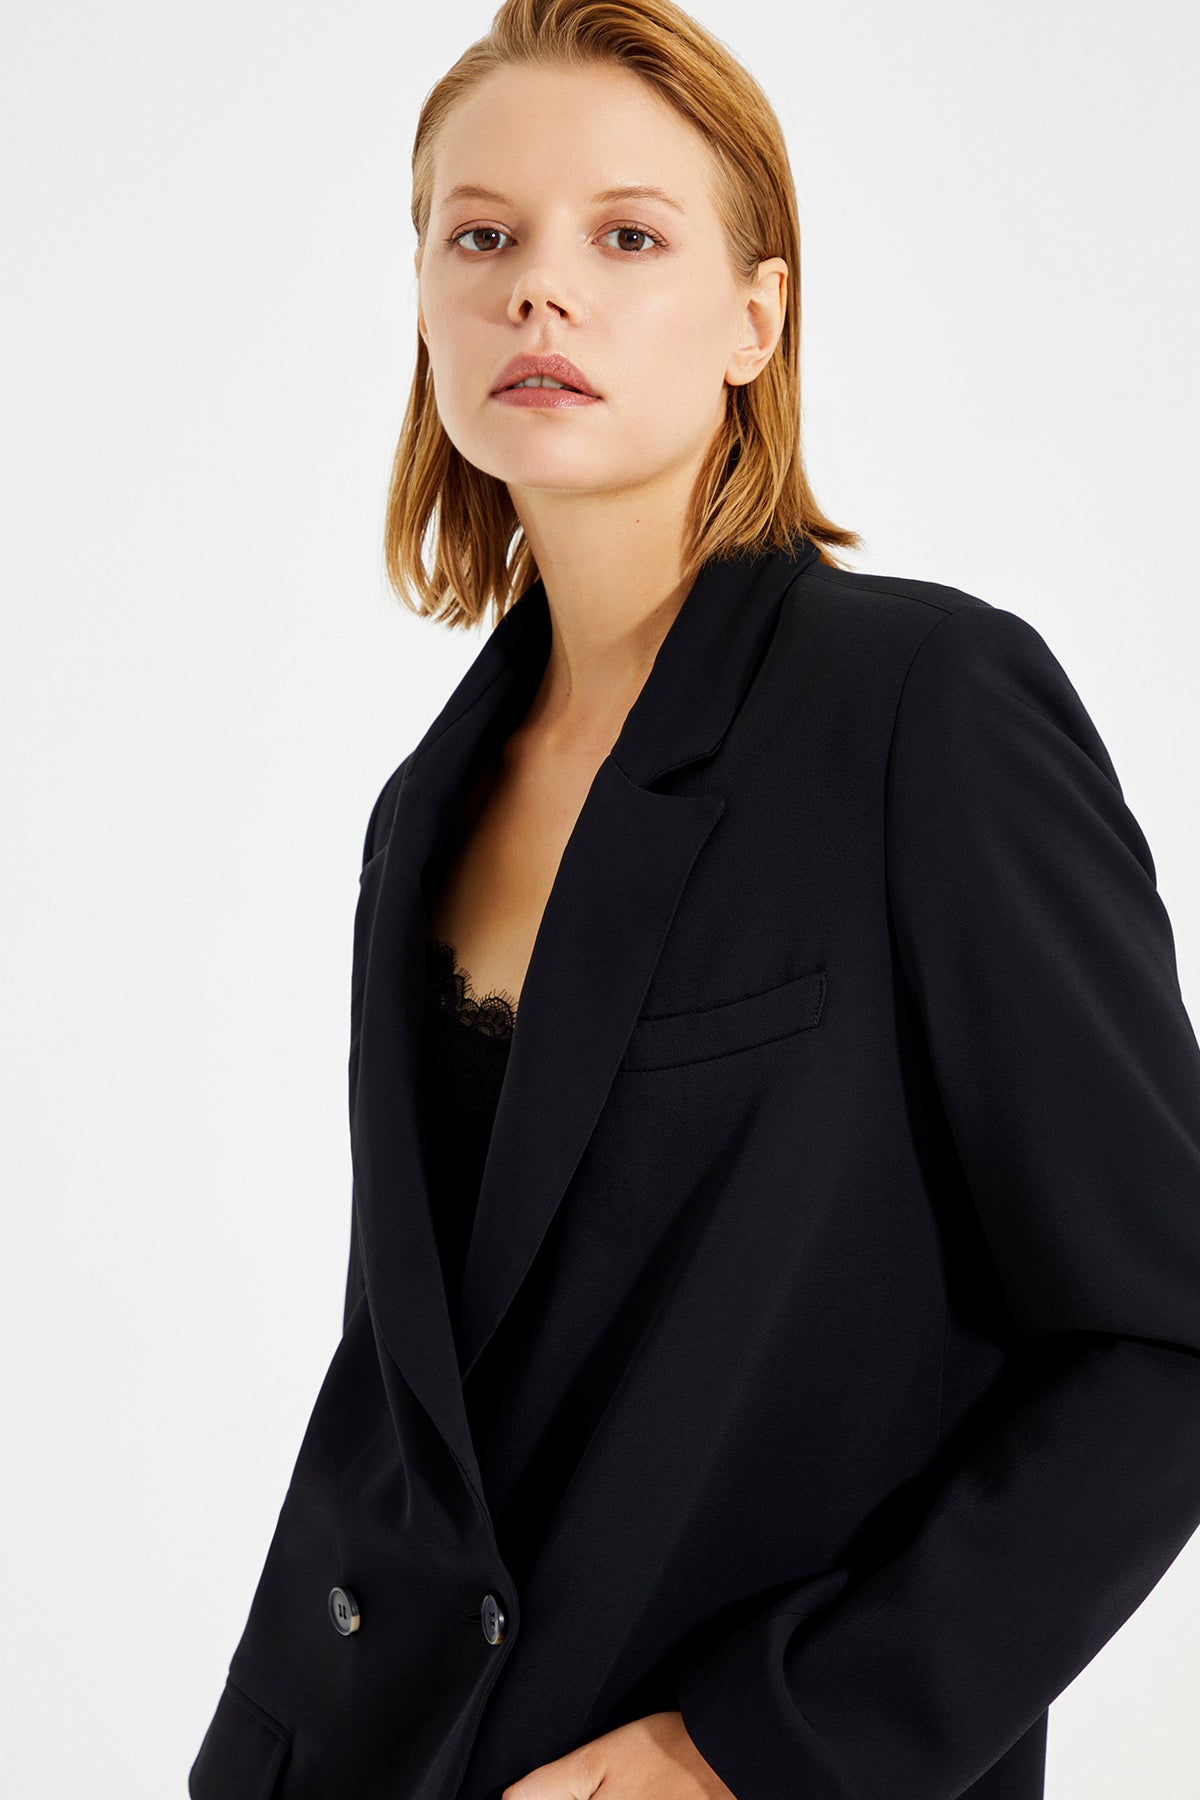 Black Double Breasted Women's Blazer Jacket With Pockets